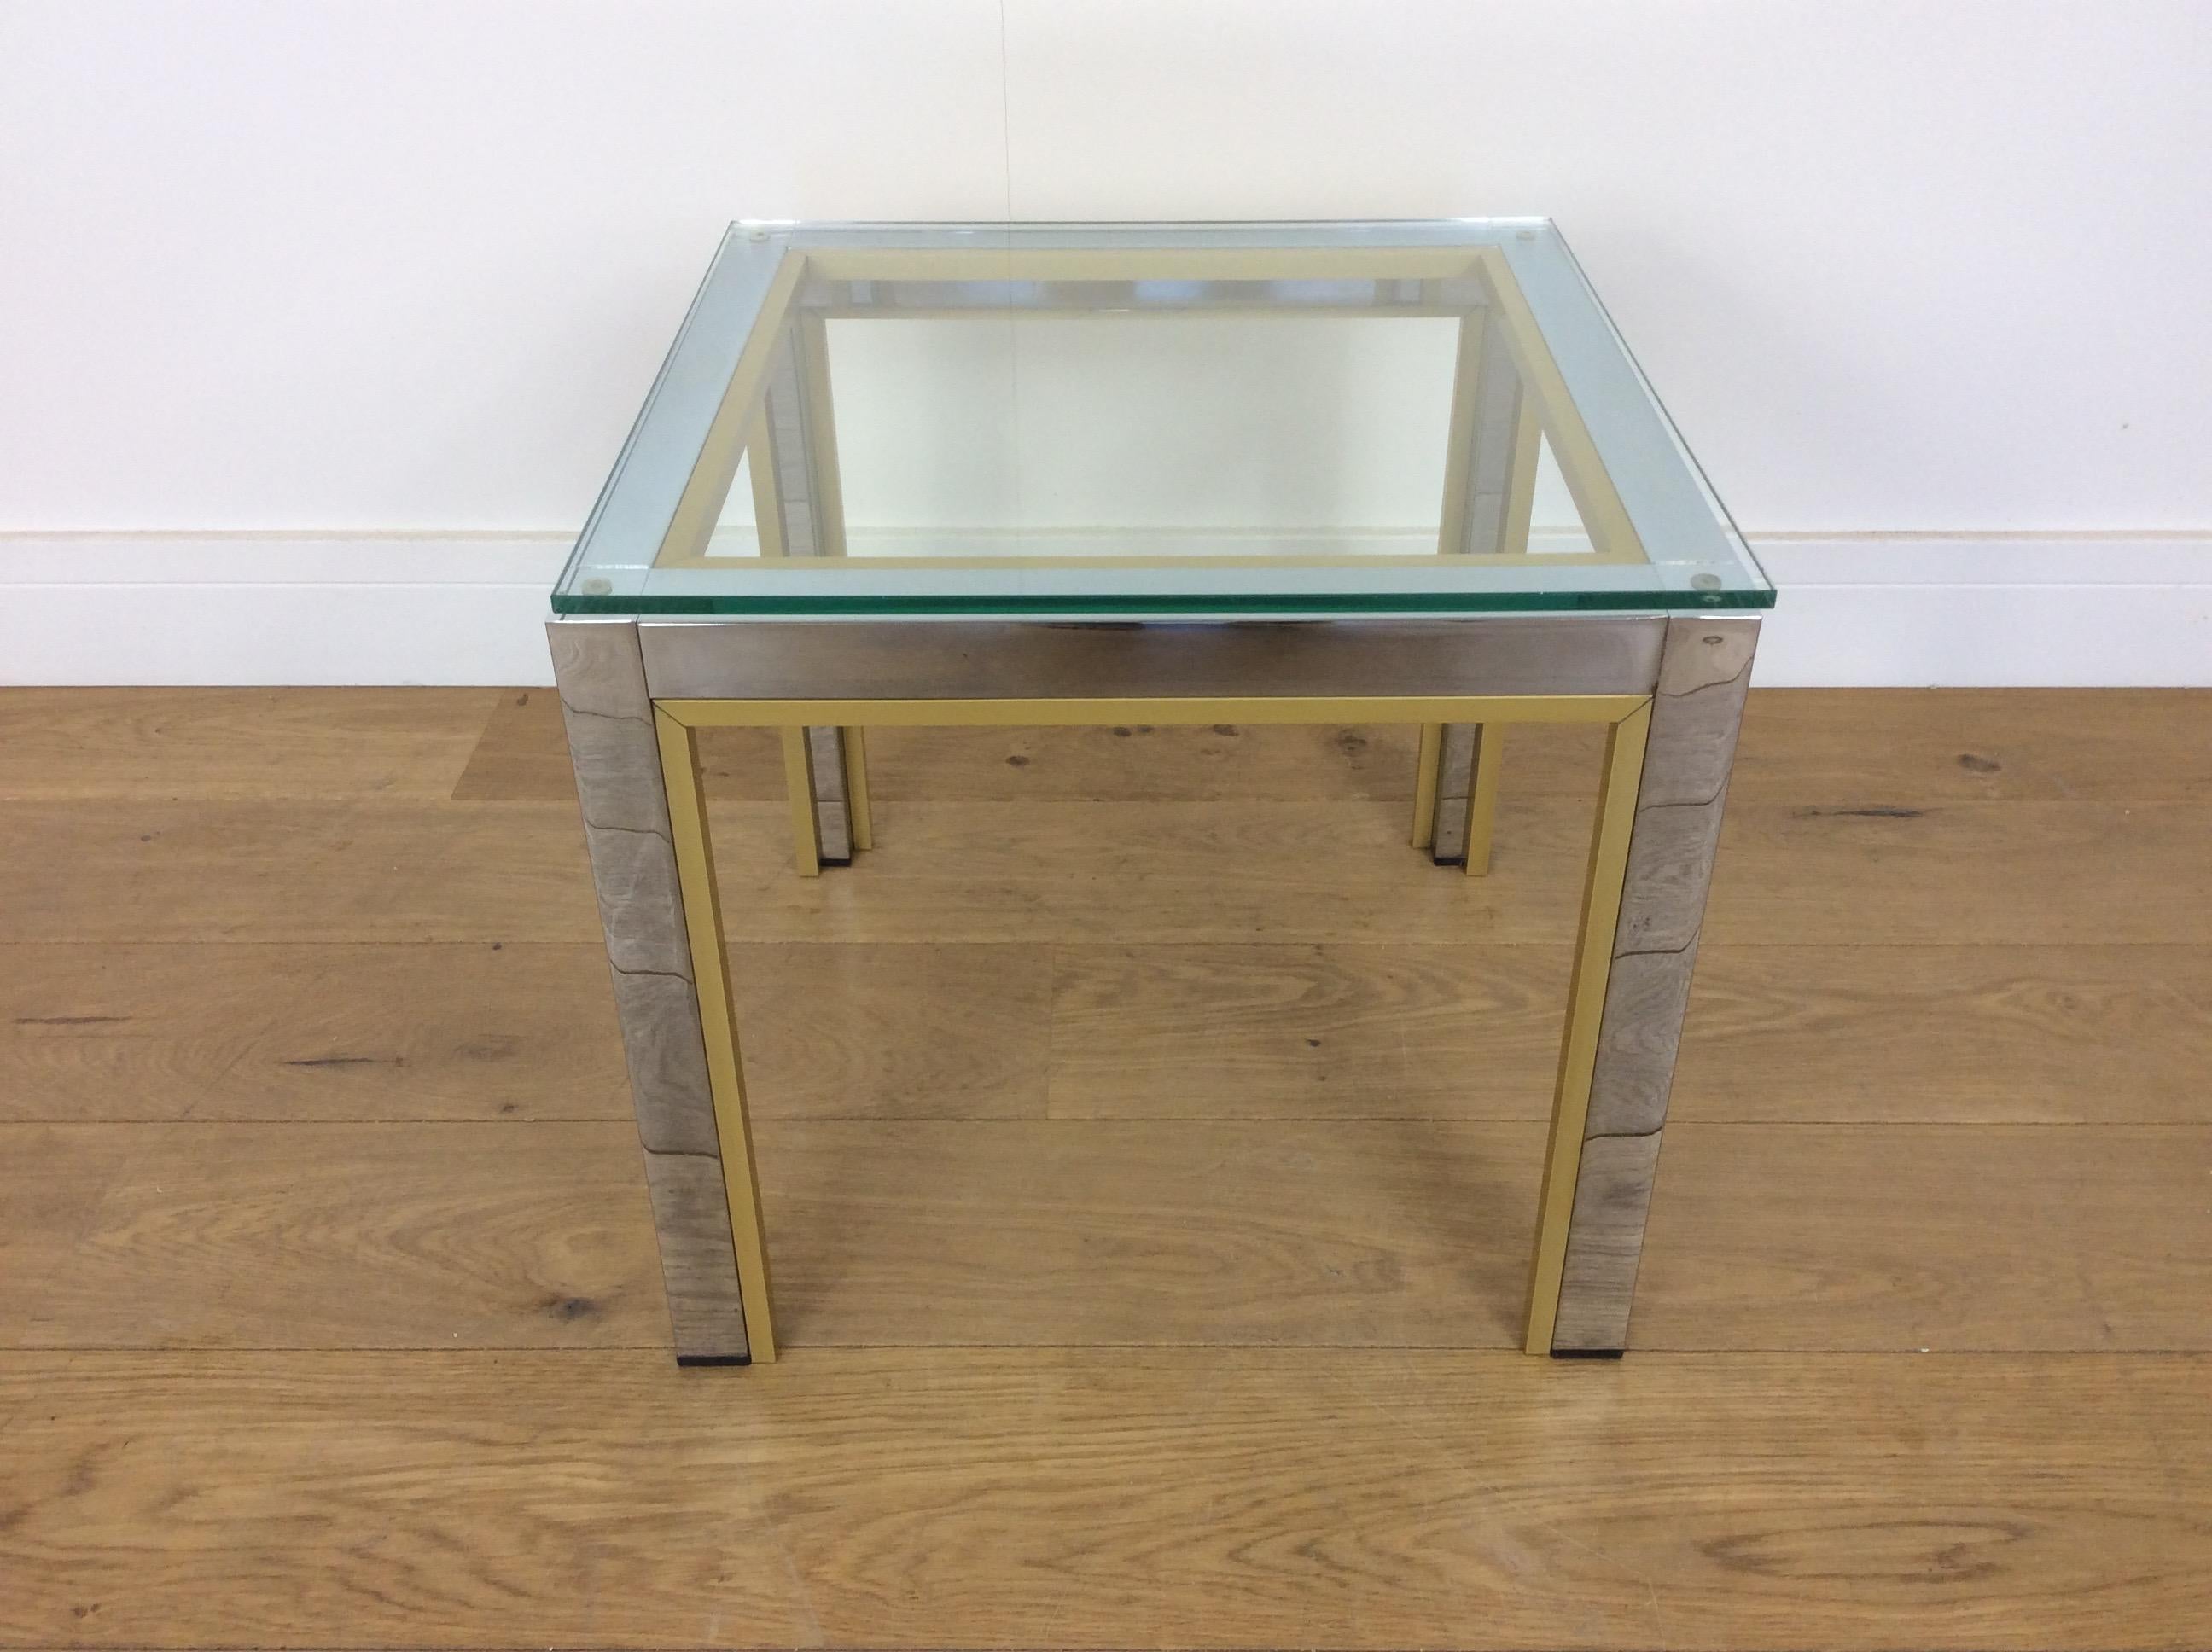 Midcentury design table.
Midcentury chrome and brass table with glass top.
Italian vintage table in chrome and brass with a glass top, a Classic combination for the iconic designs of Zevi srl Italy,.
Measures: 41.5 cm H 46 cm sq
Italy, circa 1975.